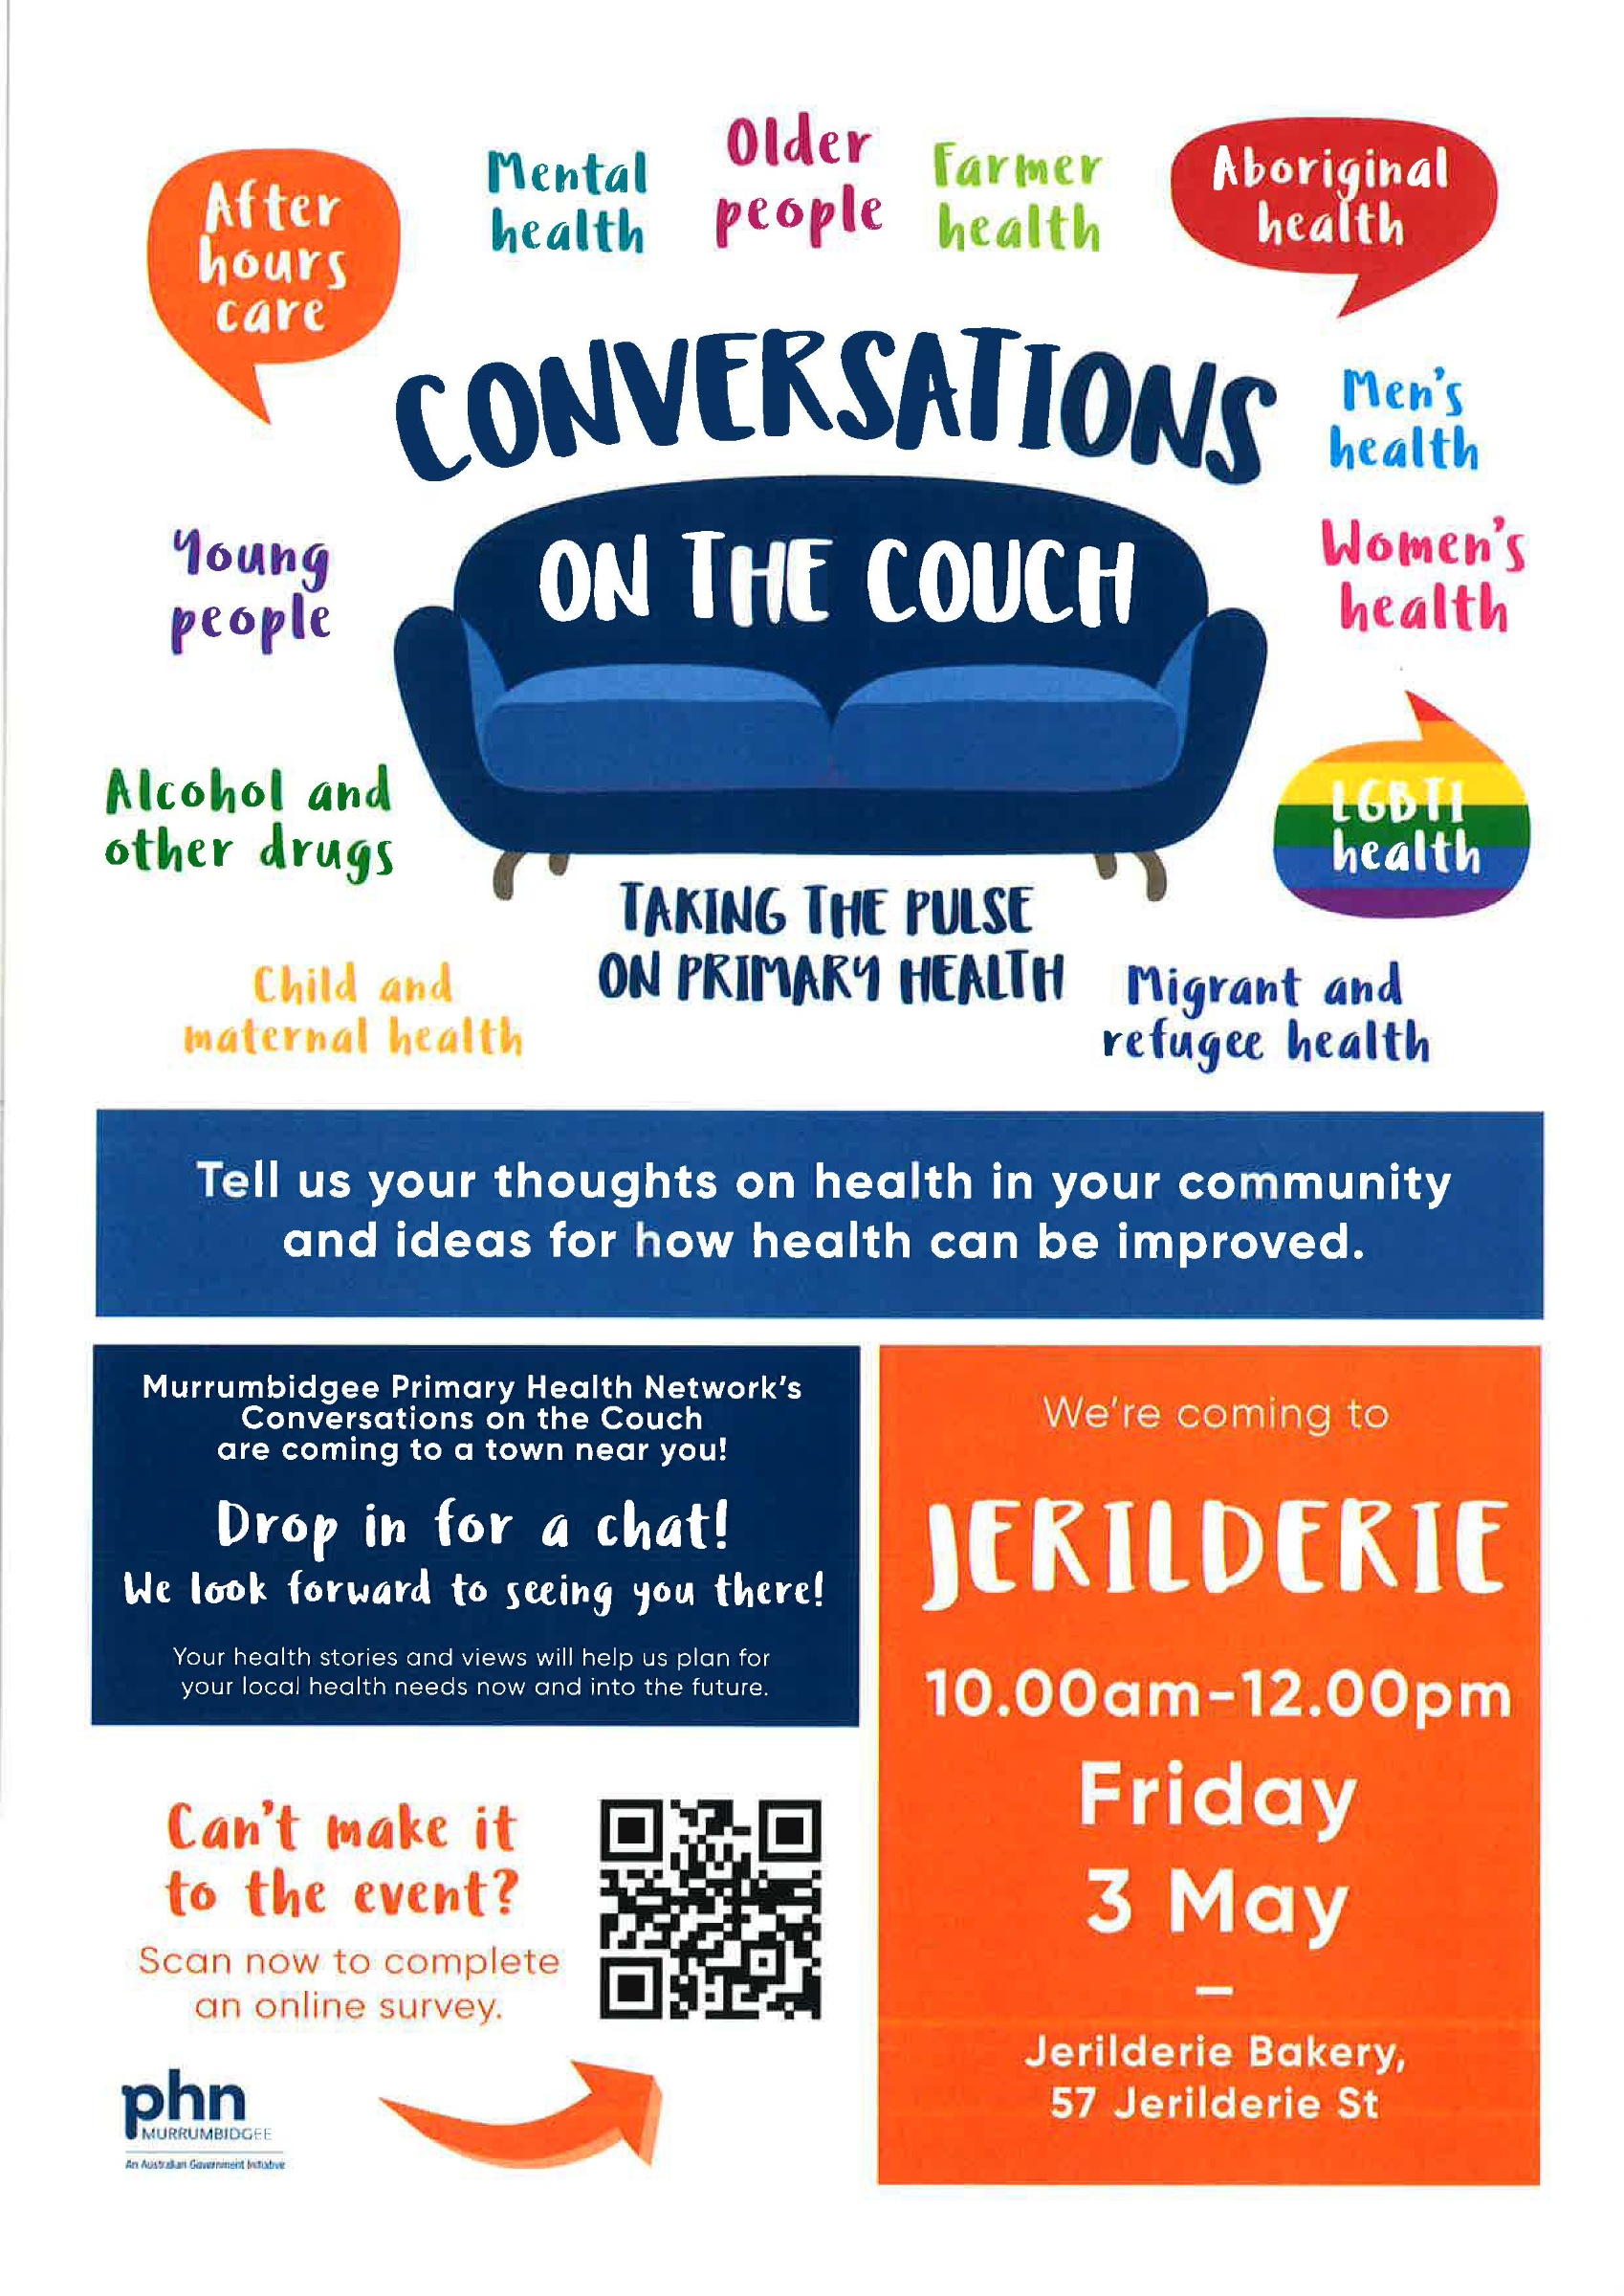 Conversations on the Couch - Jerilderie